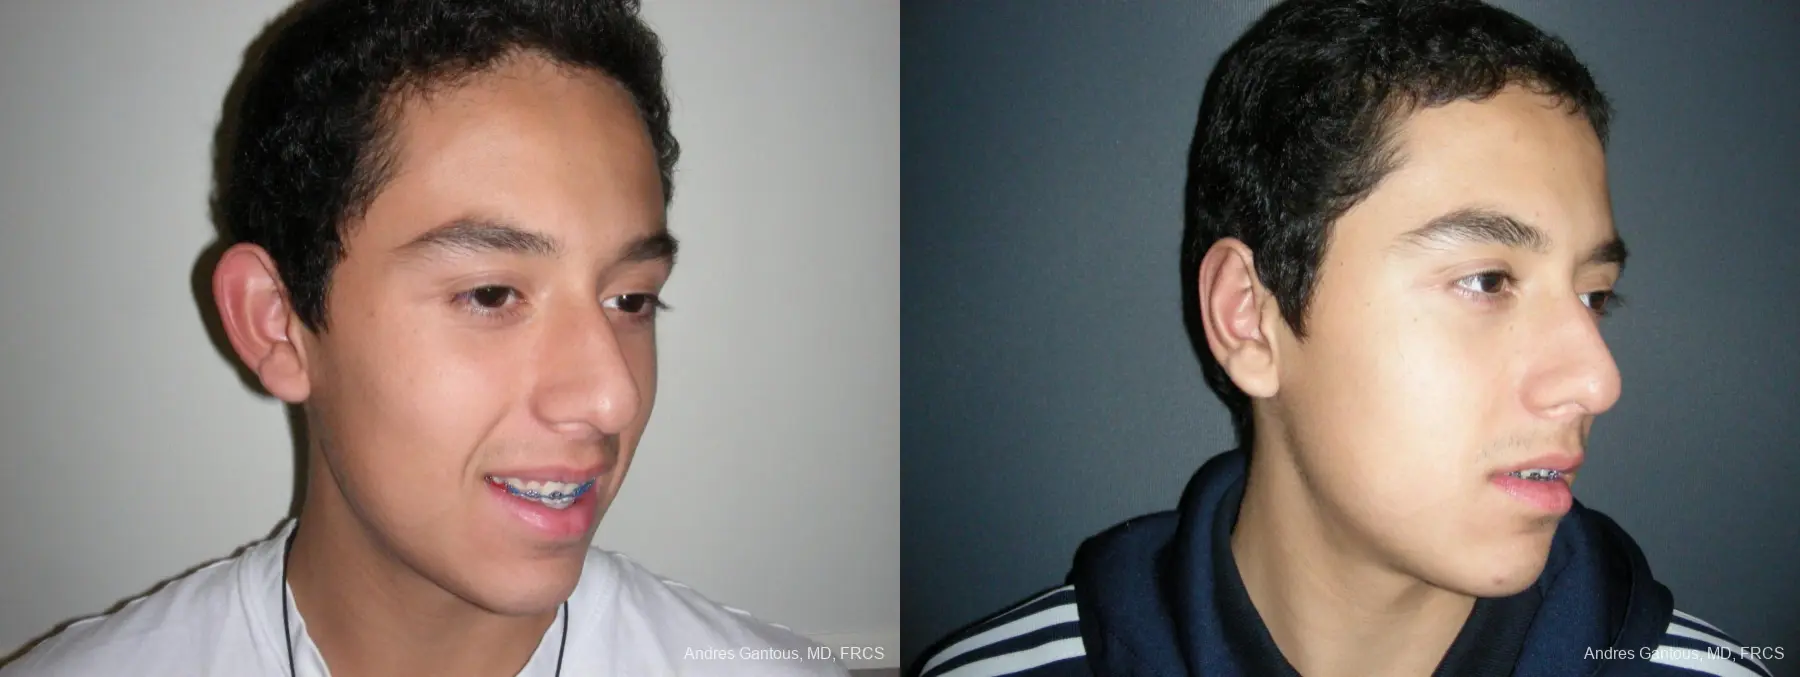 Otoplasty And Earlobe Repair: Patient 5 - Before and After 2